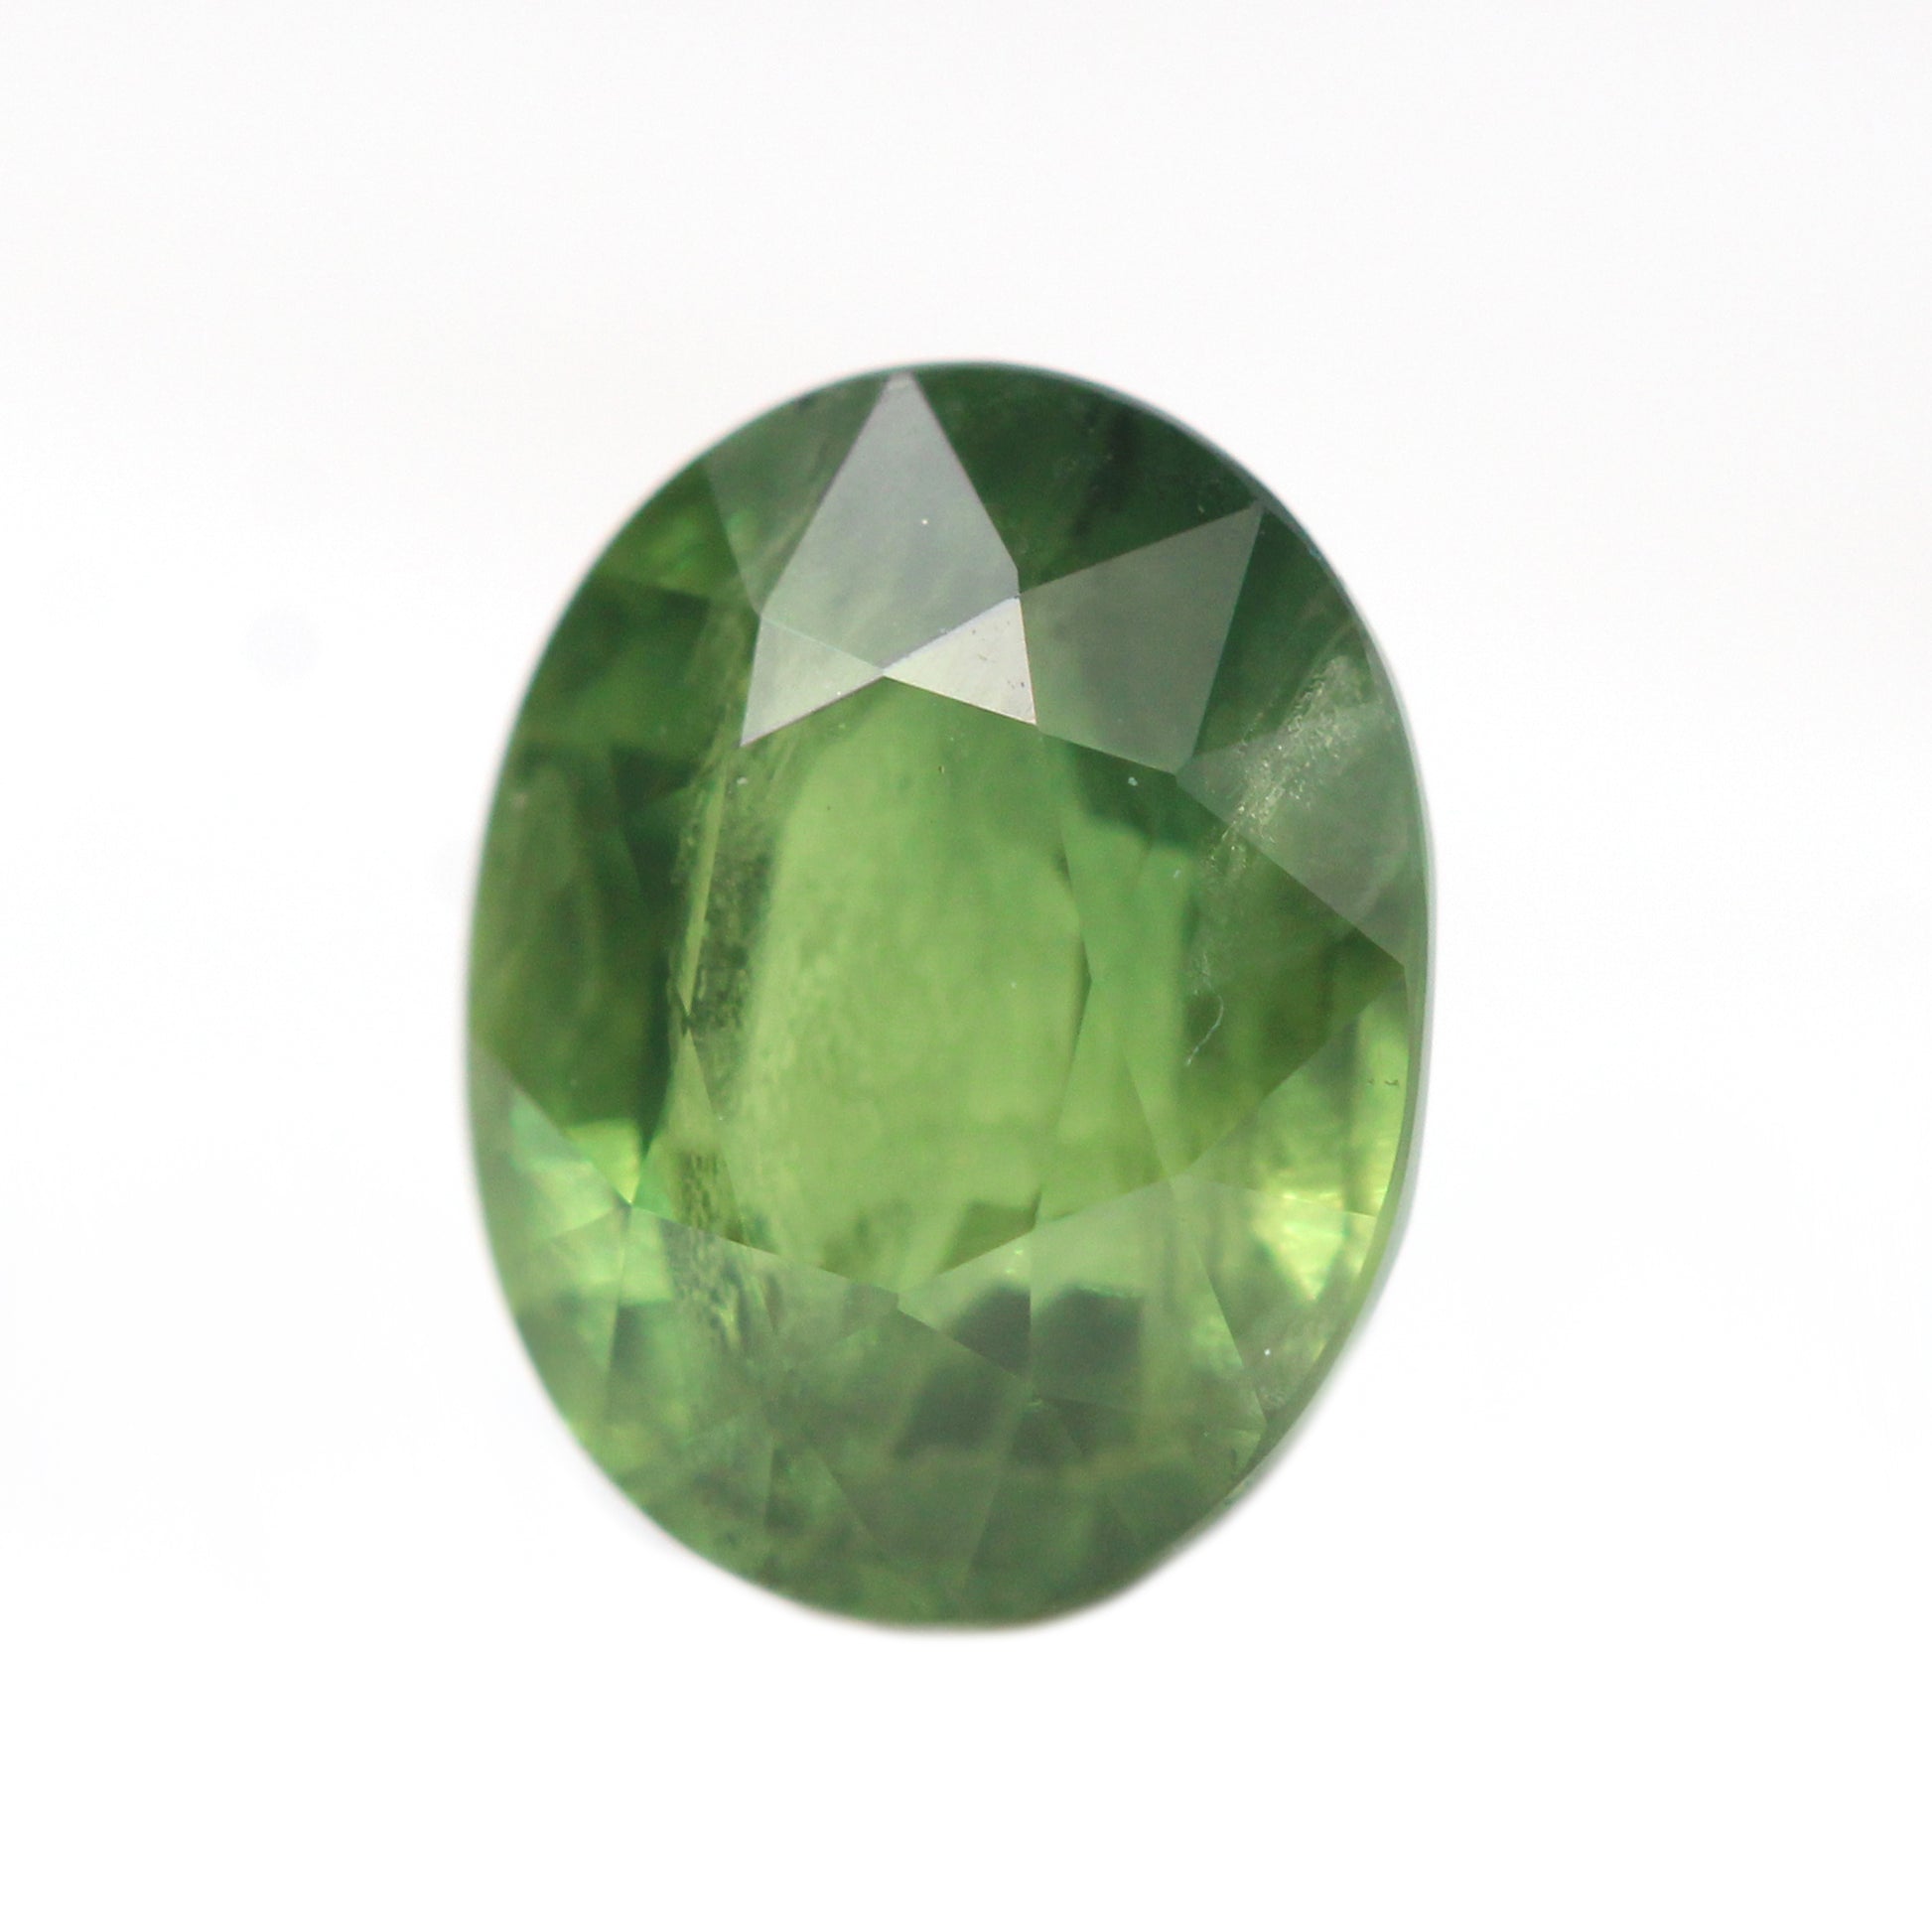 1.35 Carat Light Green Oval Sapphire for Custom Work - Inventory Code LGOS135 - Midwinter Co. Alternative Bridal Rings and Modern Fine Jewelry